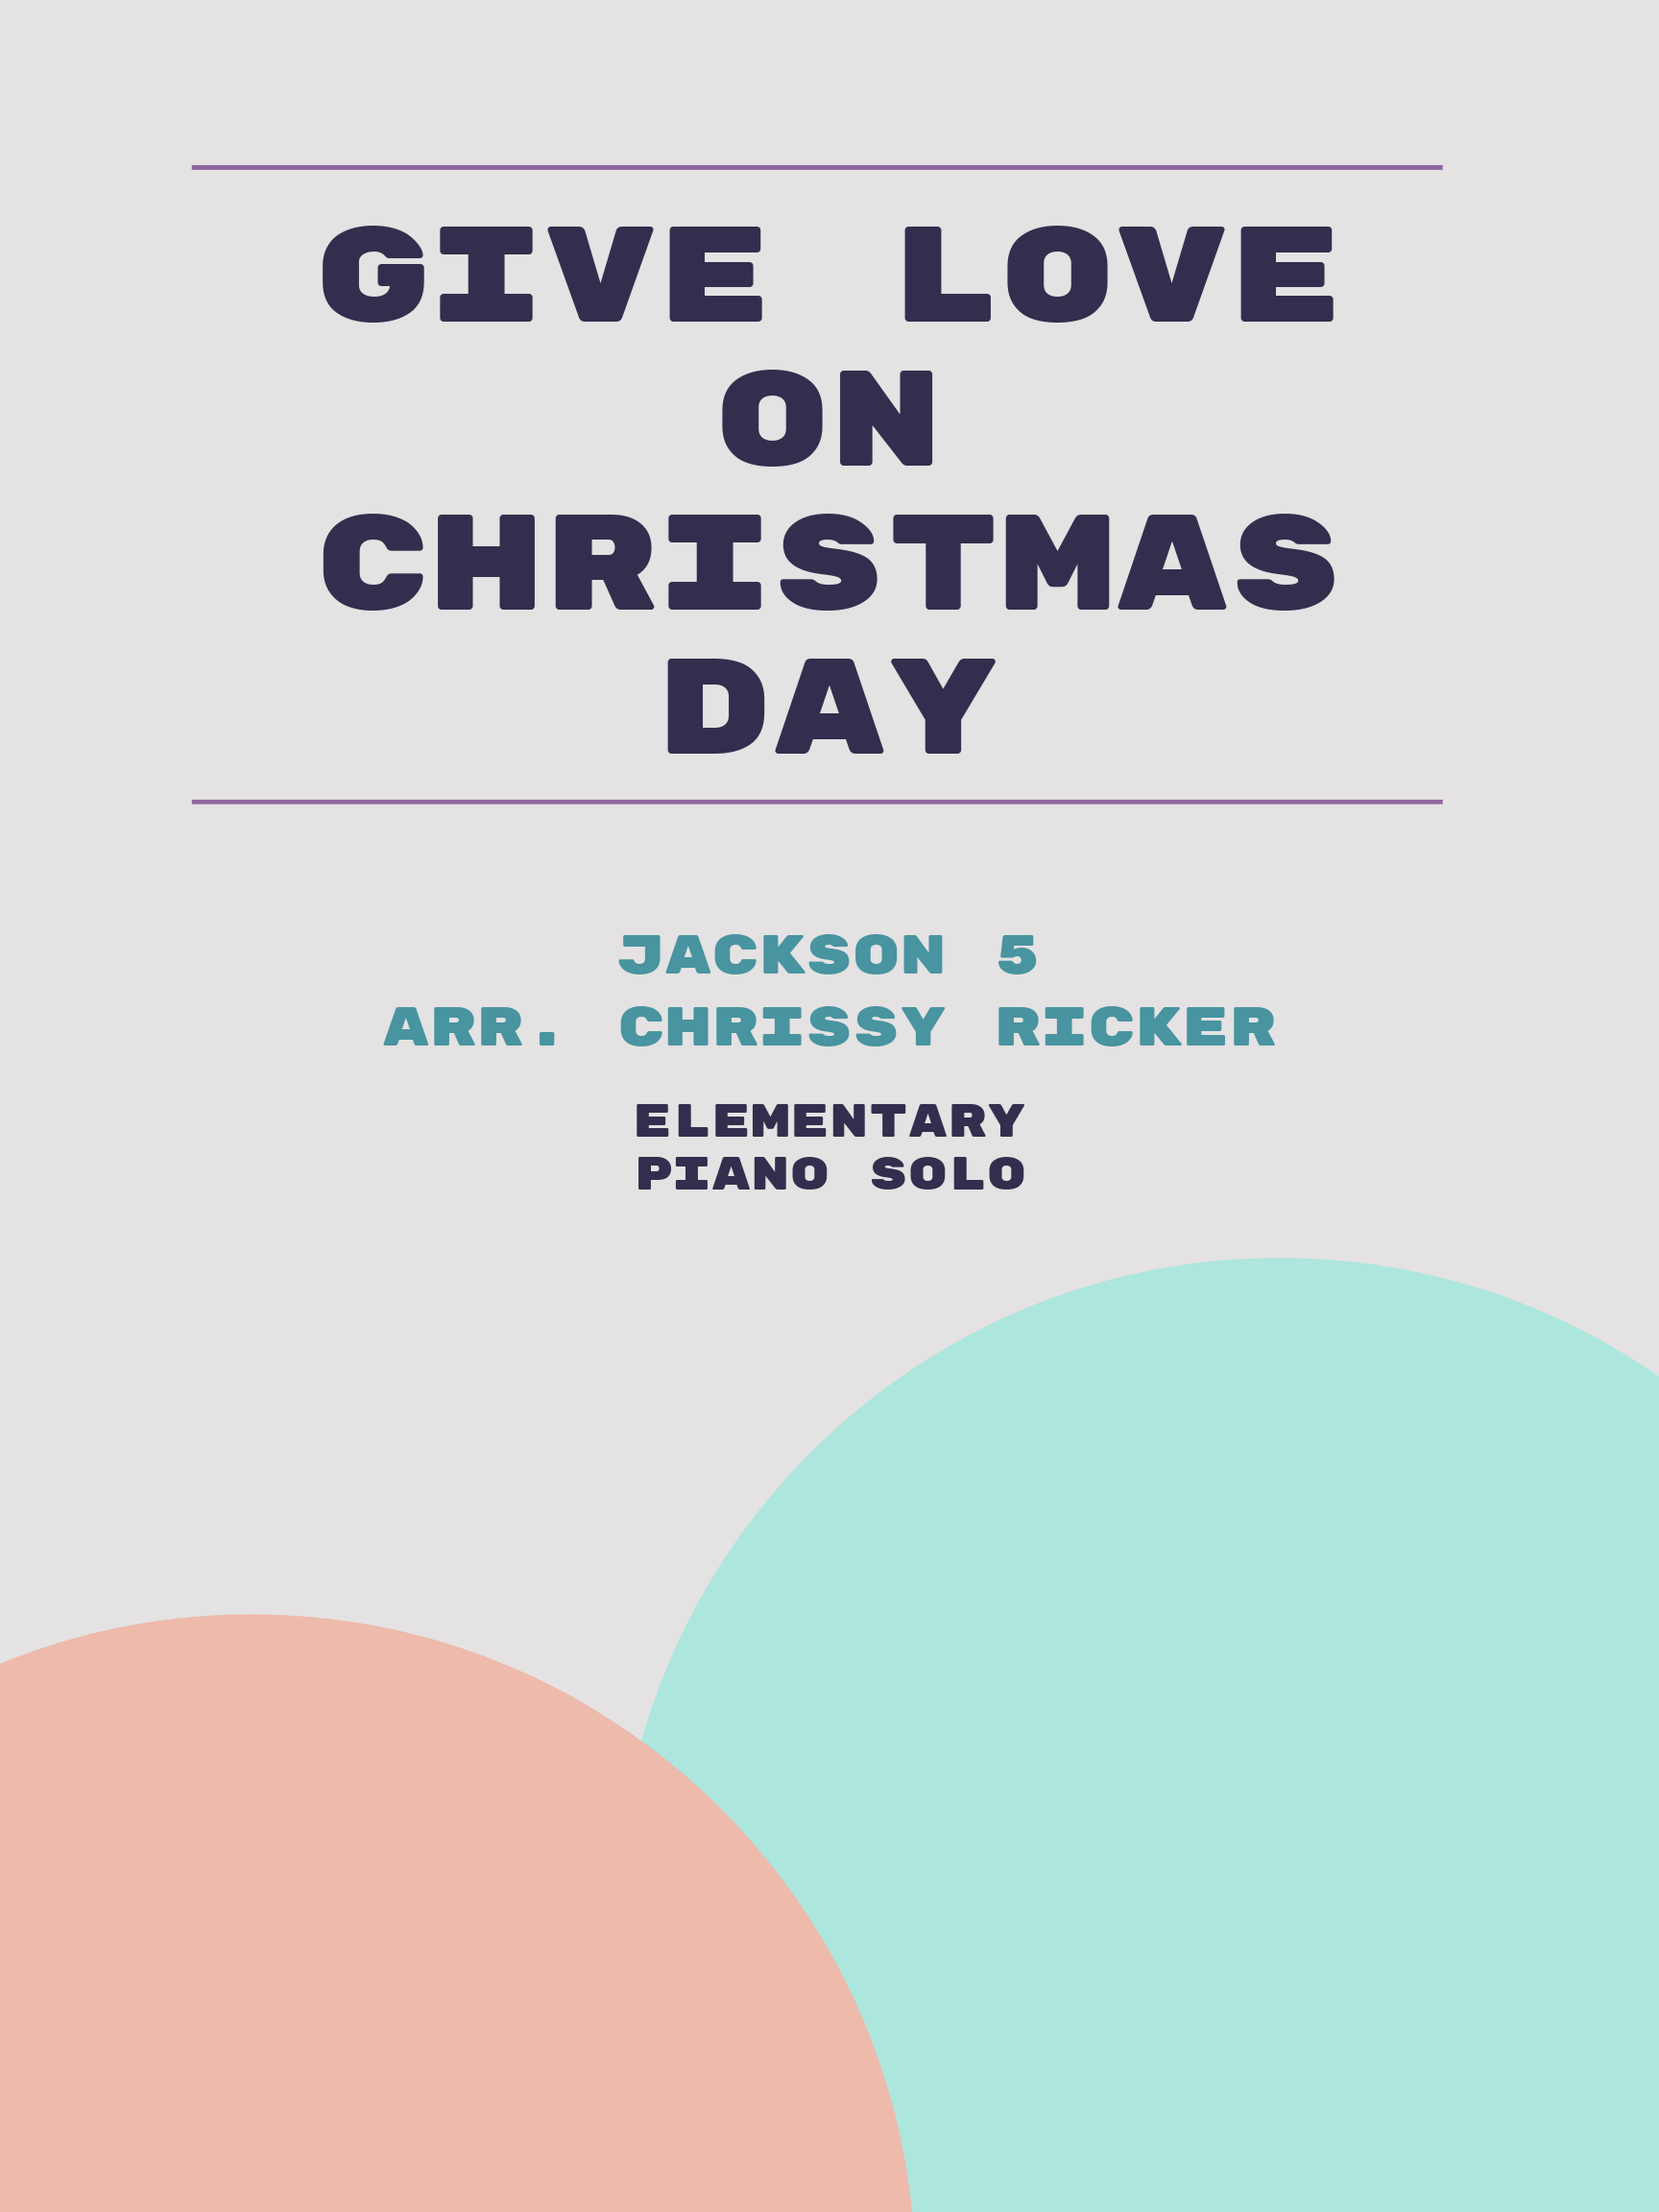 Give Love on Christmas Day by Jackson 5